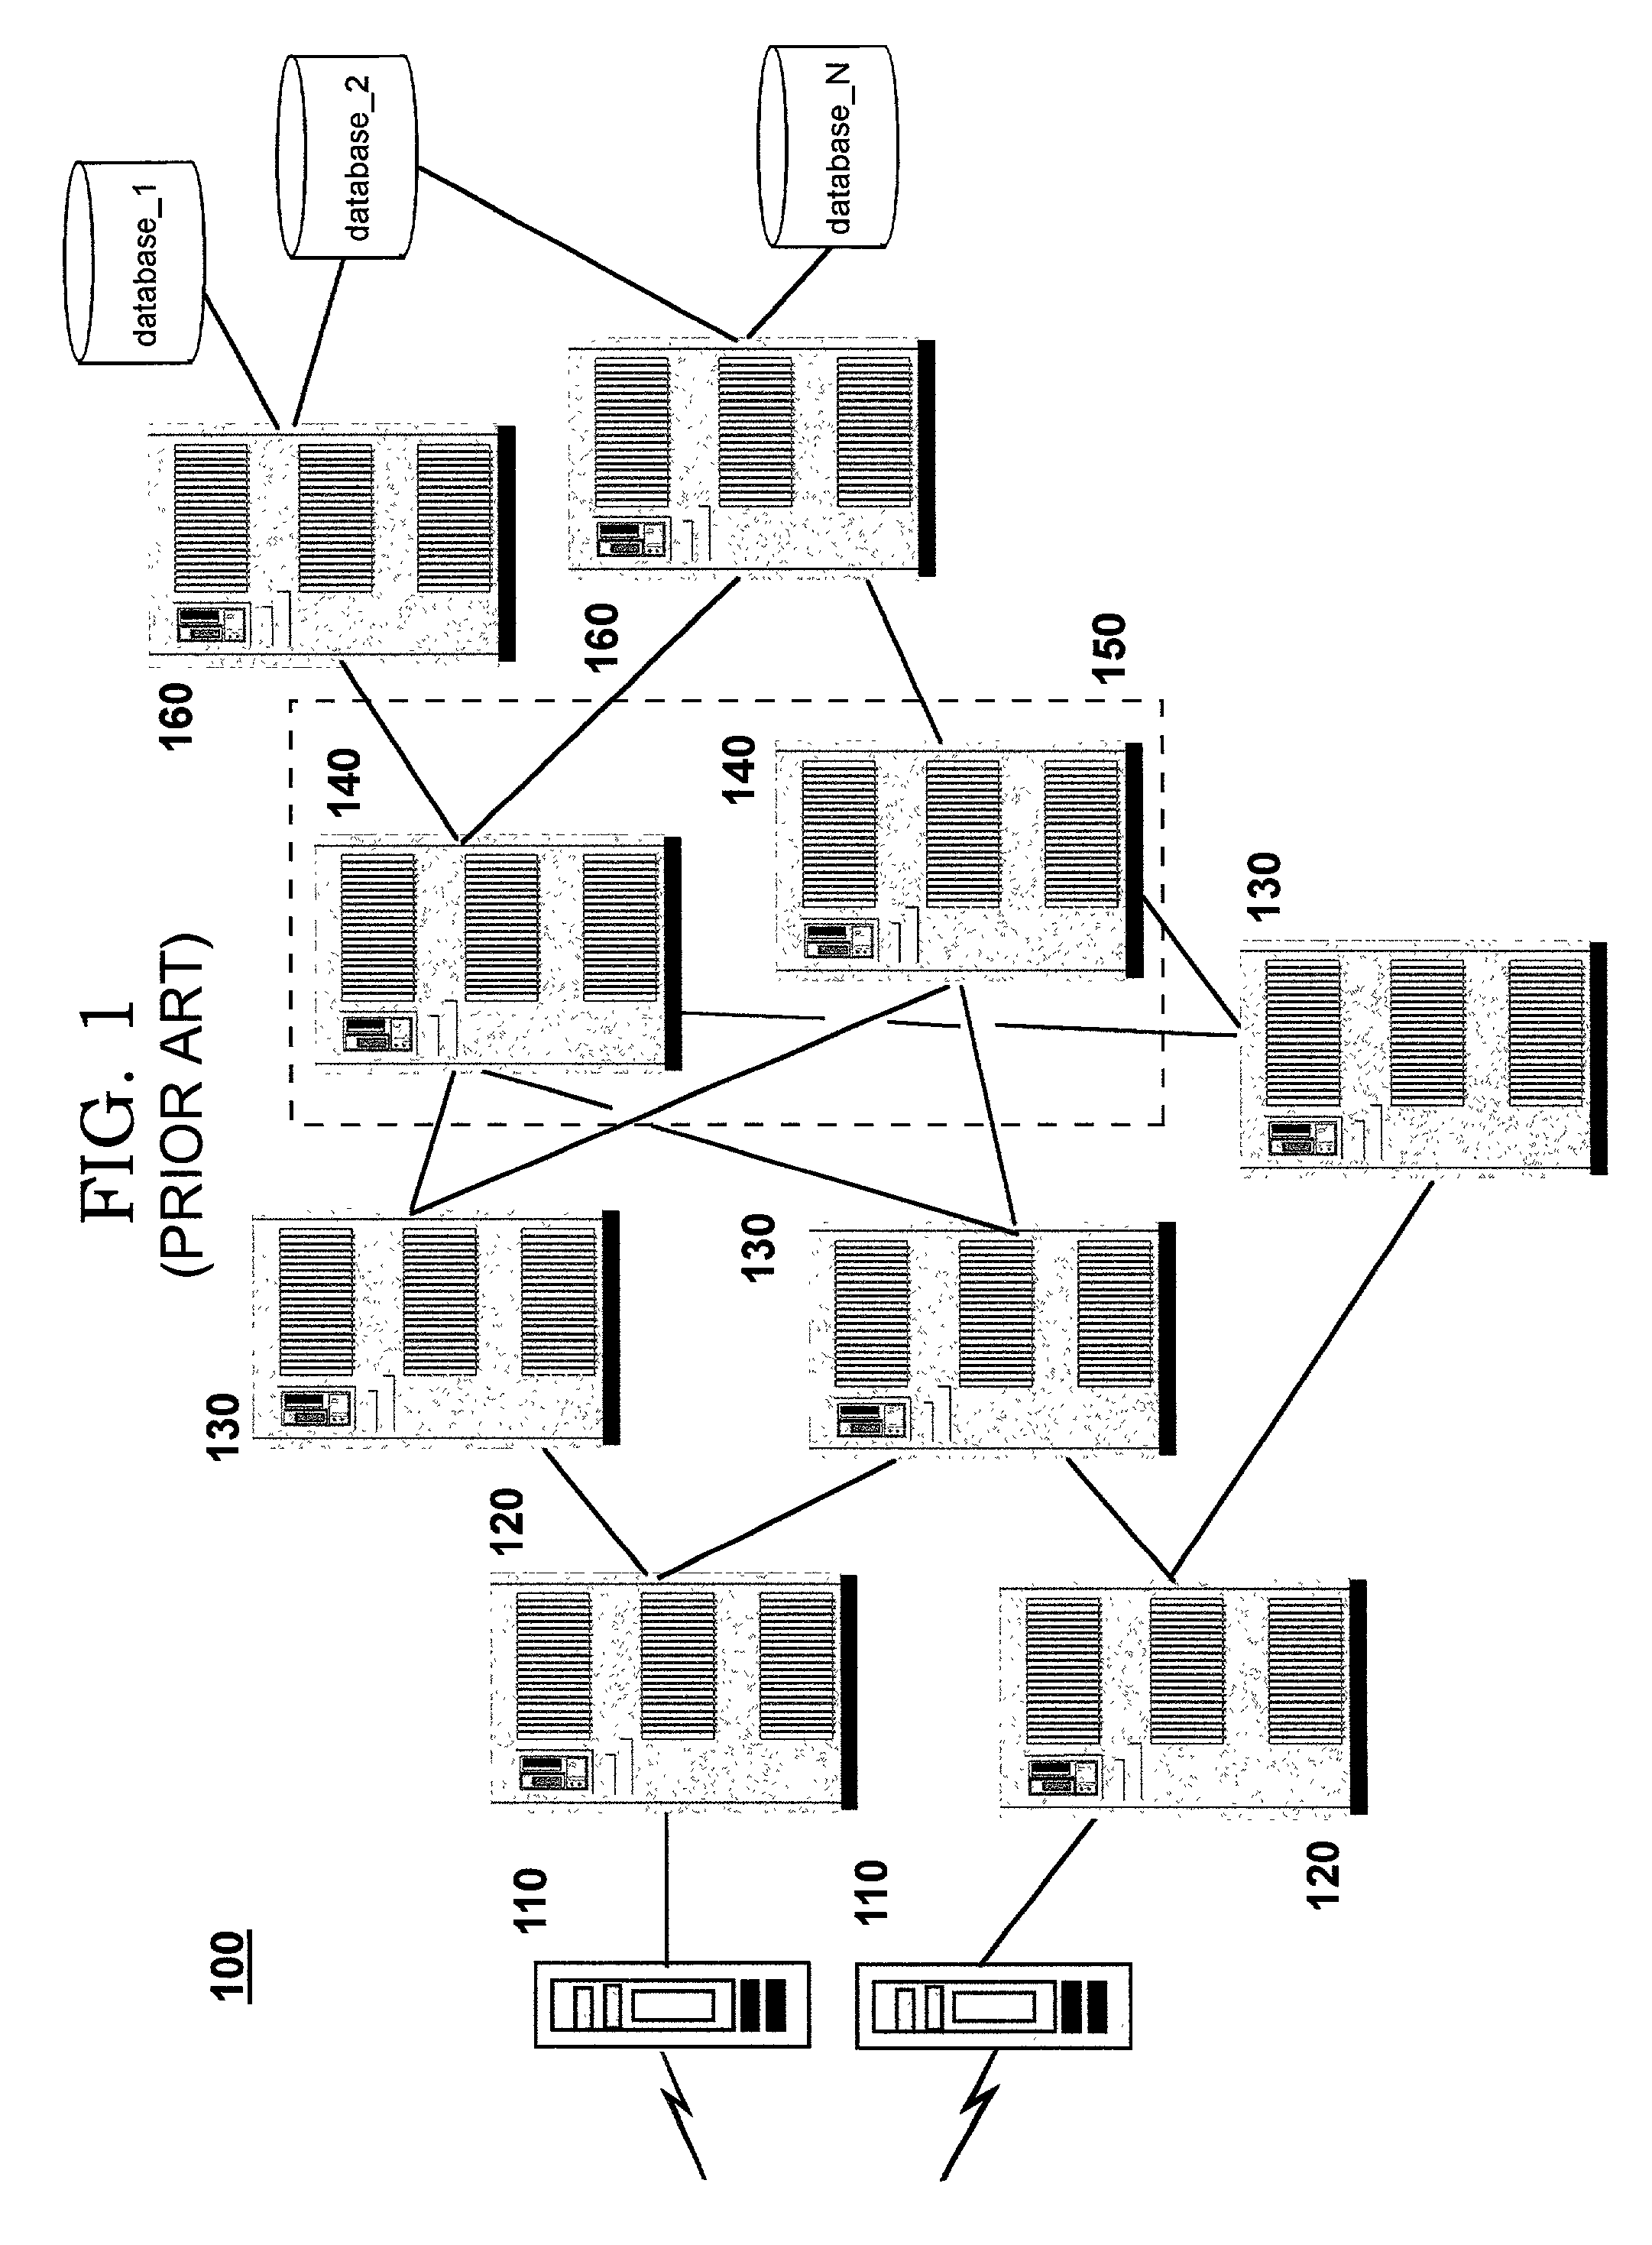 Dynamic redeployment of services in a computing network